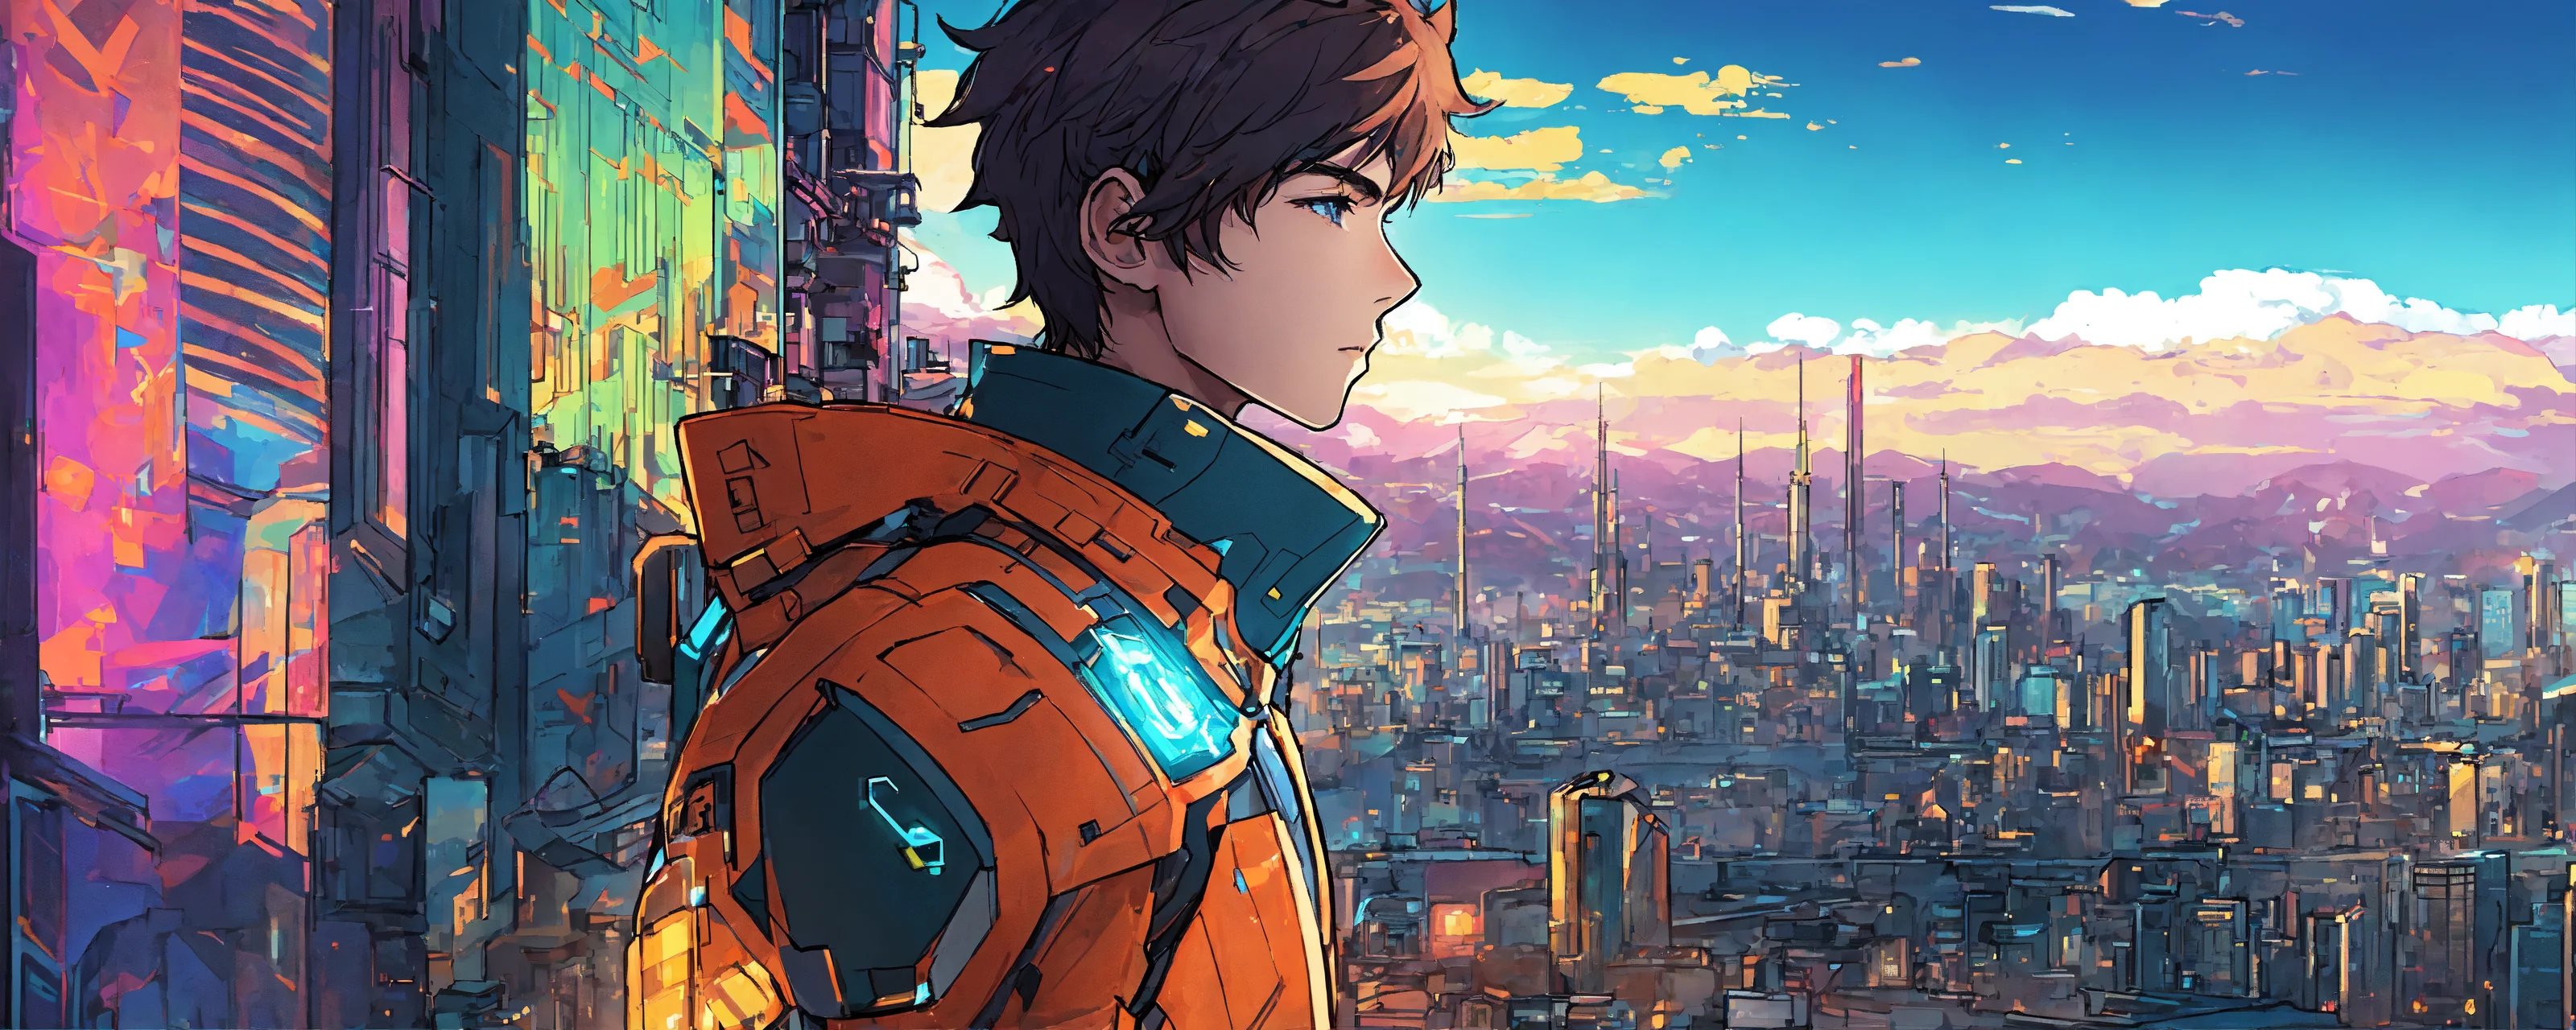 Anime boy wearing a space suit looking over at a futuristic city